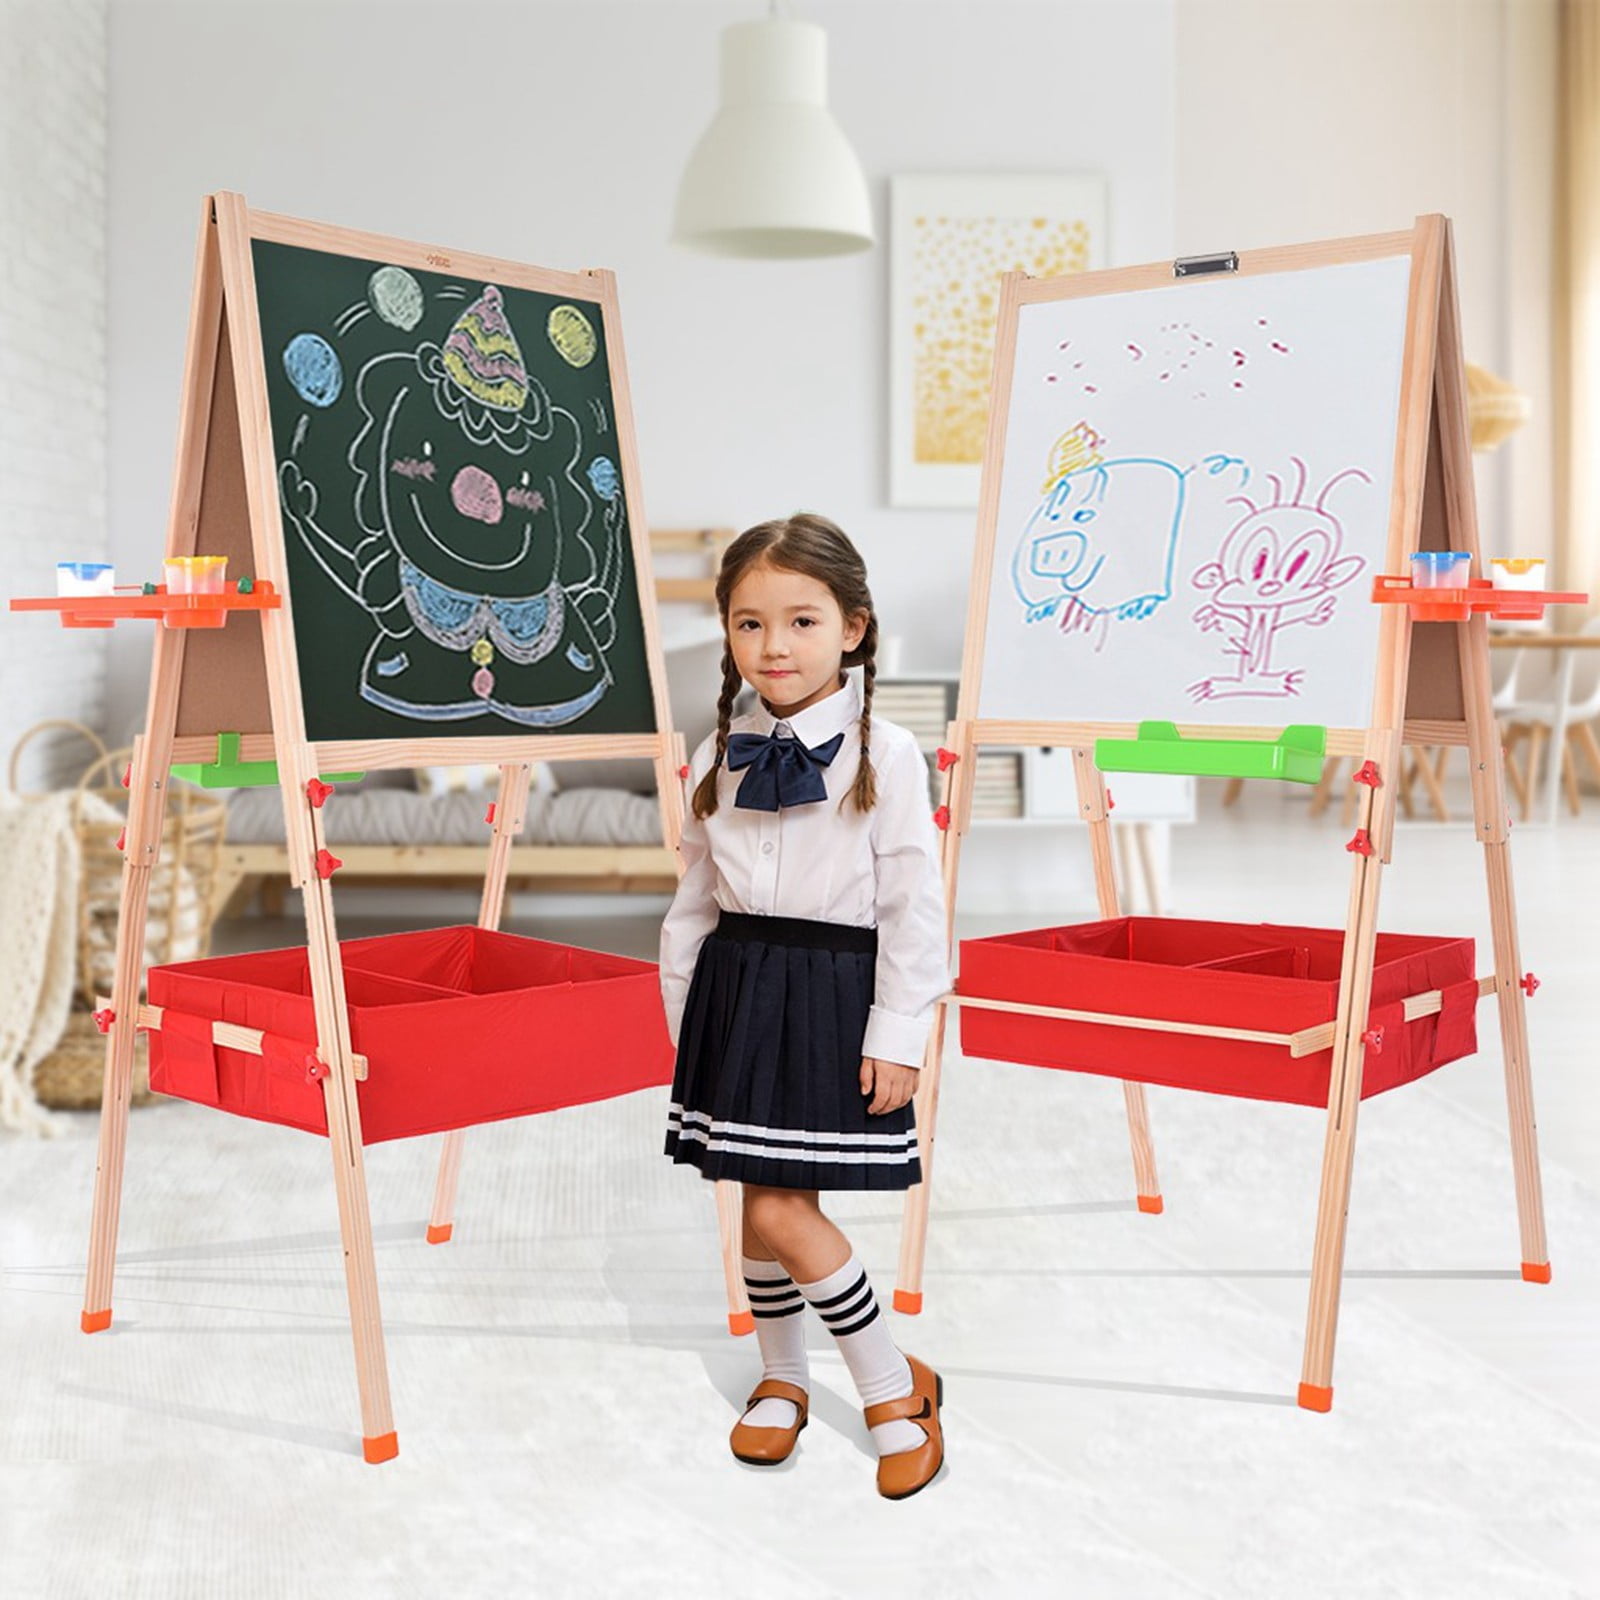 3 in 1 Double Sided Wooden Easel with Accessories Height Adjustable and Foldable Painting Drawing Artist Easel Educational Toys for Children Kids Fit for 3-15 Years Old Kids Art Easel A